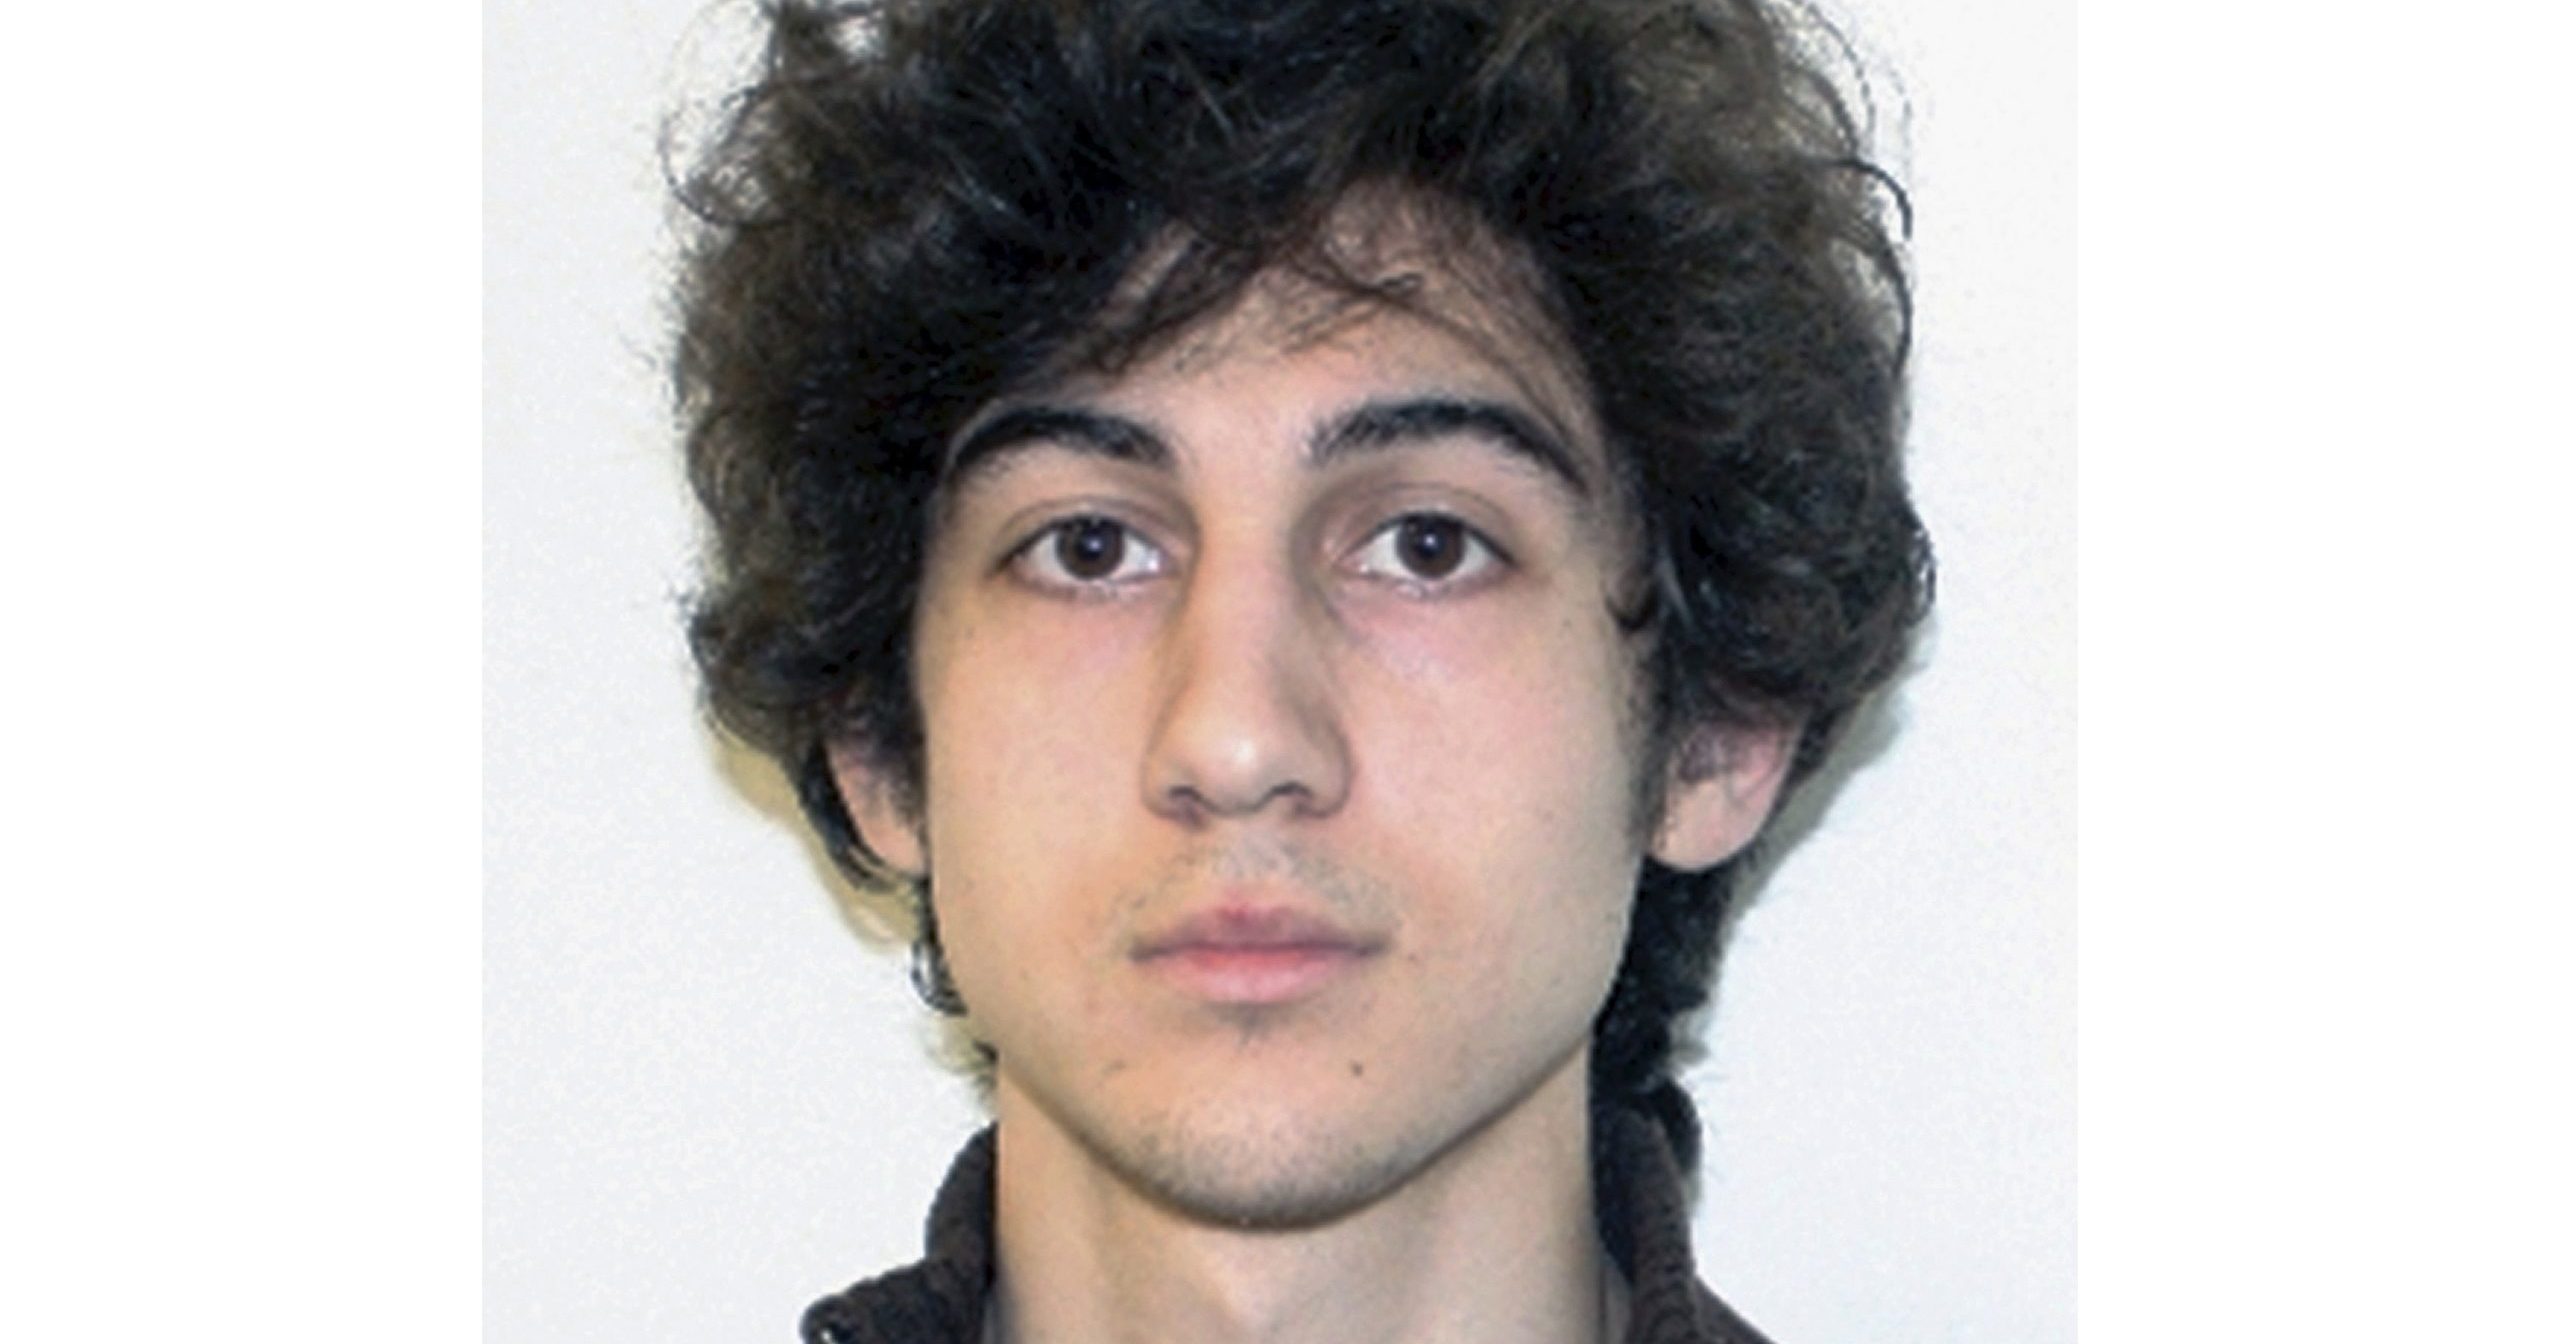 This file photo released on April 19, 2013, by the FBI shows Dzhokhar Tsarnaev, convicted and sentenced to death for carrying out the April 15, 2013, Boston Marathon bombing attack that killed three people and injured more than 260. Attorney General William Barr says the Justice Department will seek to reinstate the death sentence for Tsarnaev.